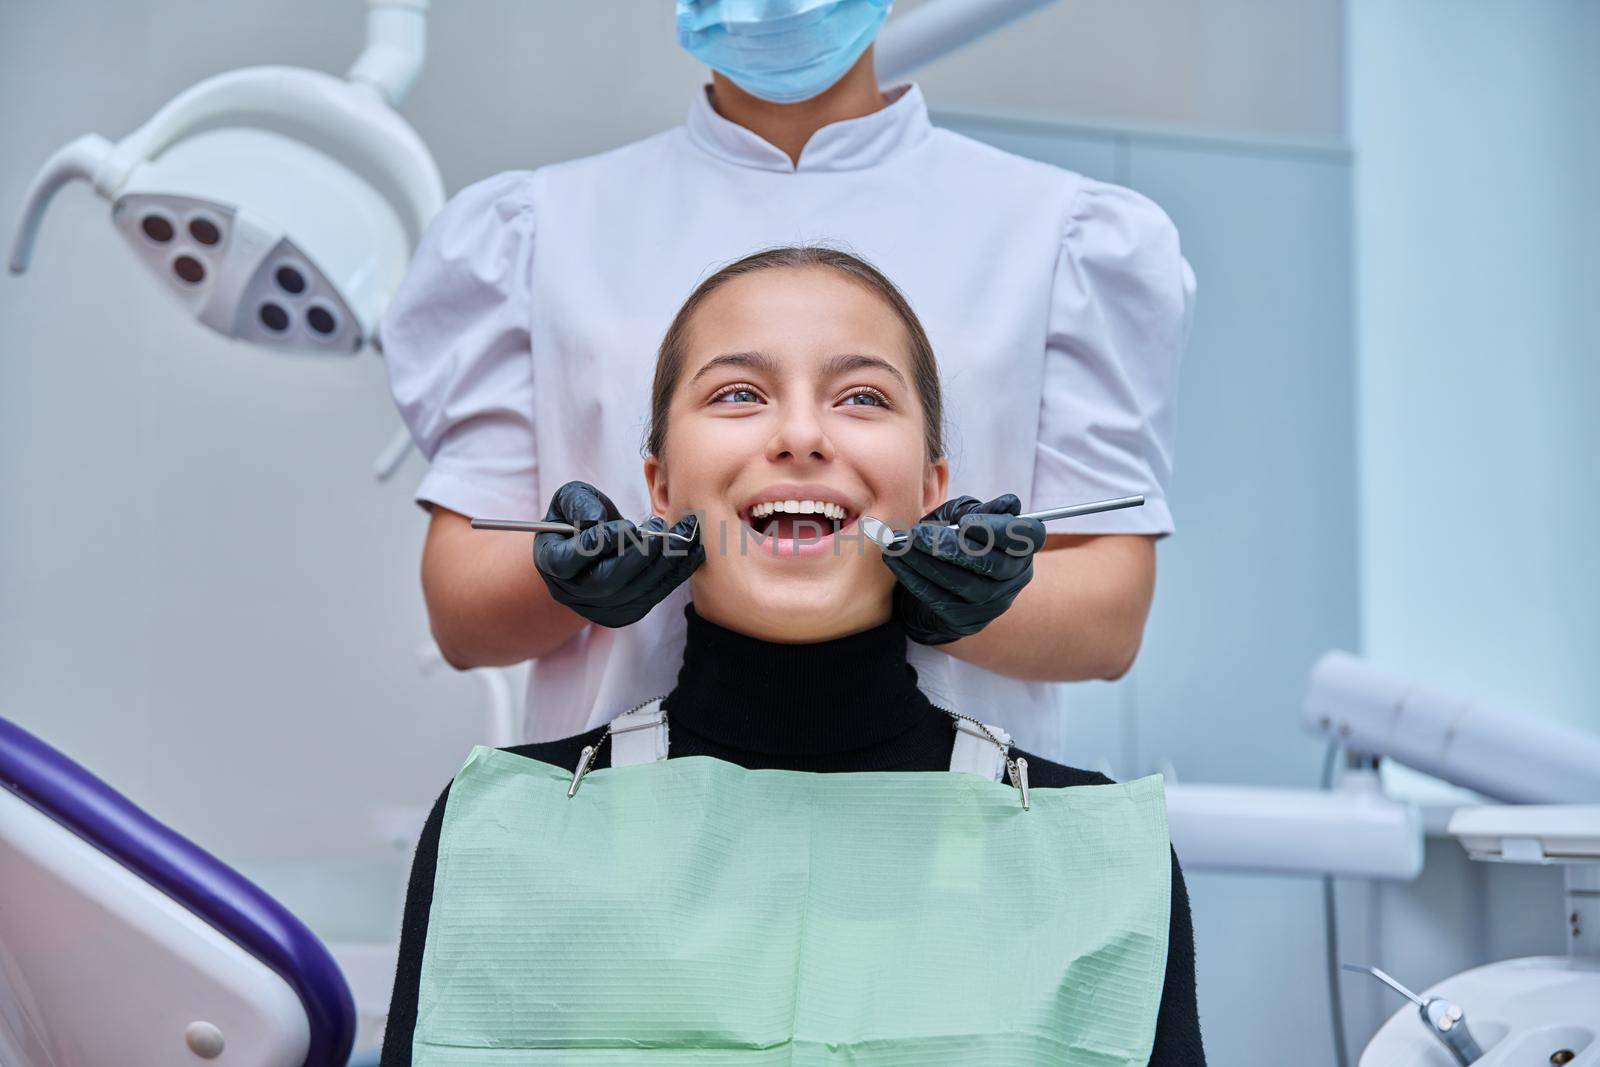 Portrait of young teenage girl in dental chair with hands of doctor with tools. Female teenager smiling with teeth looking at camera in dentist office. Adolescence hygiene treatment dental health care